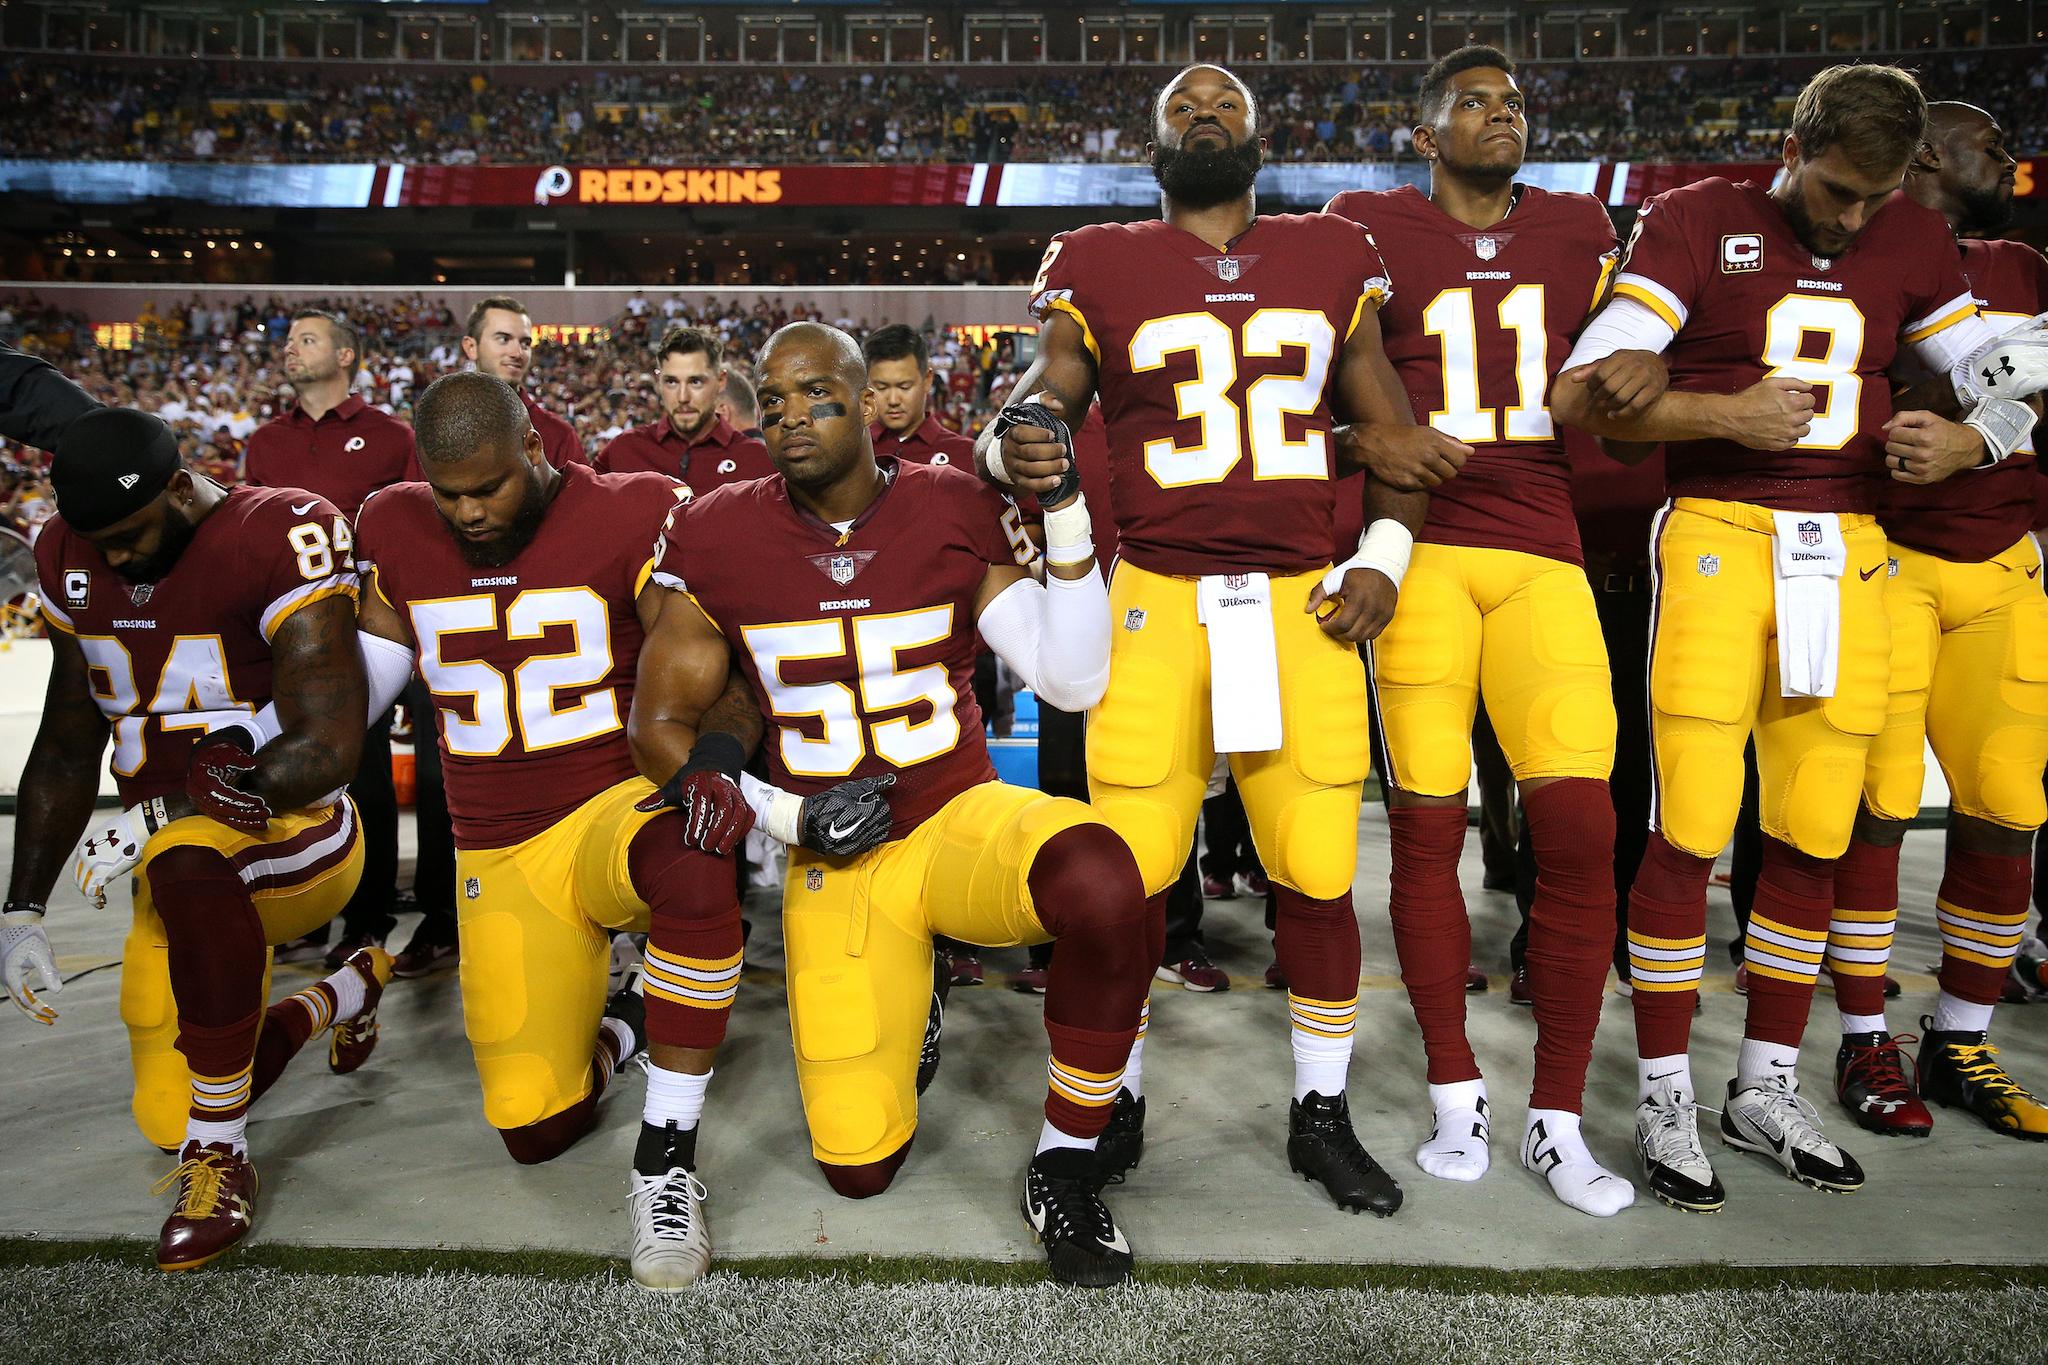 NFL players have been kneeling to raise awareness of issues with equality and police brutality